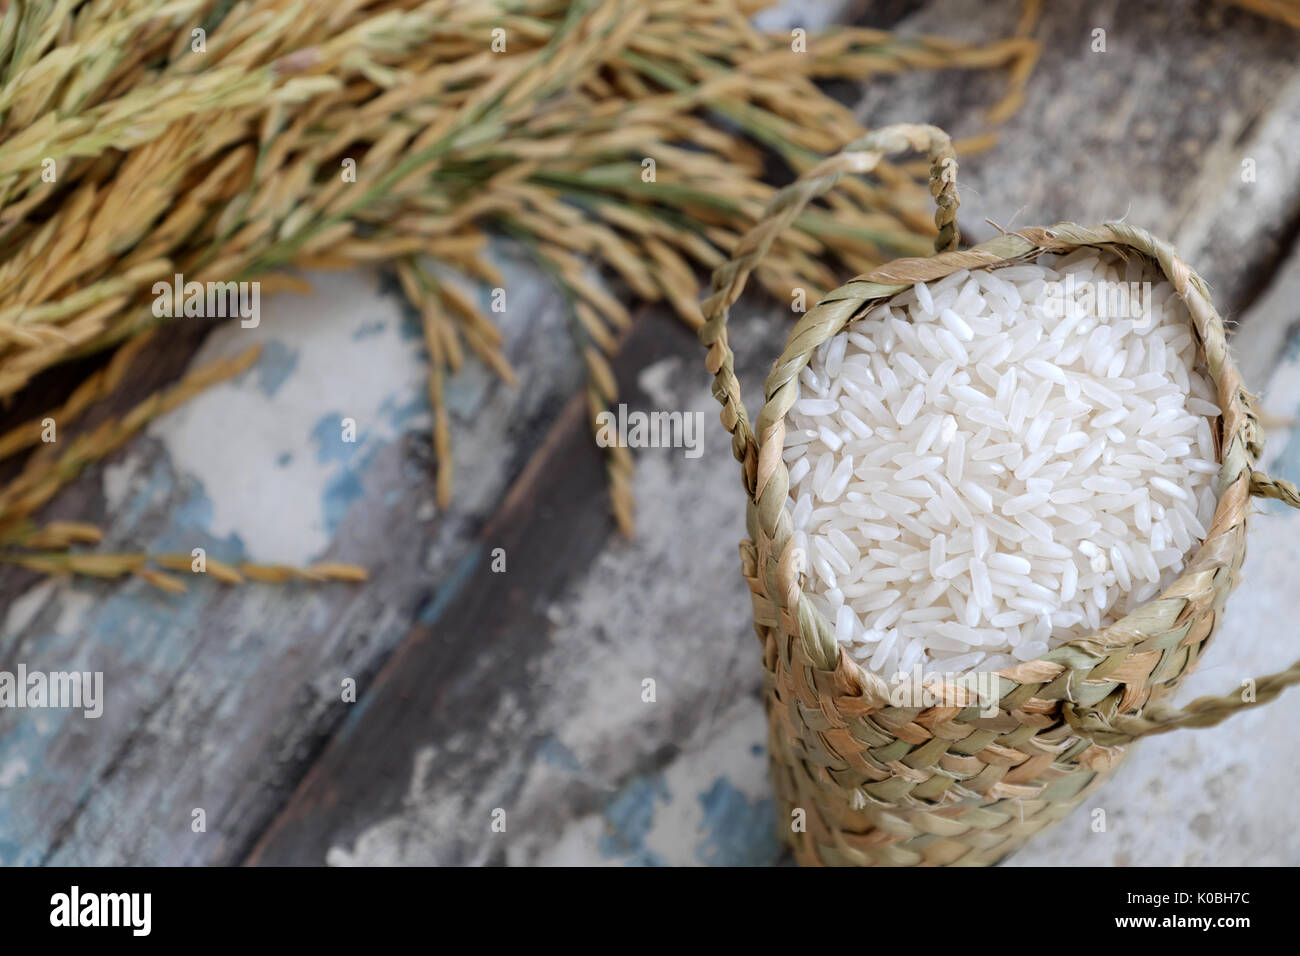 Close up of paddy grain and rice seed on wooden background, sheaf of rice in yellow and basket of grains Stock Photo